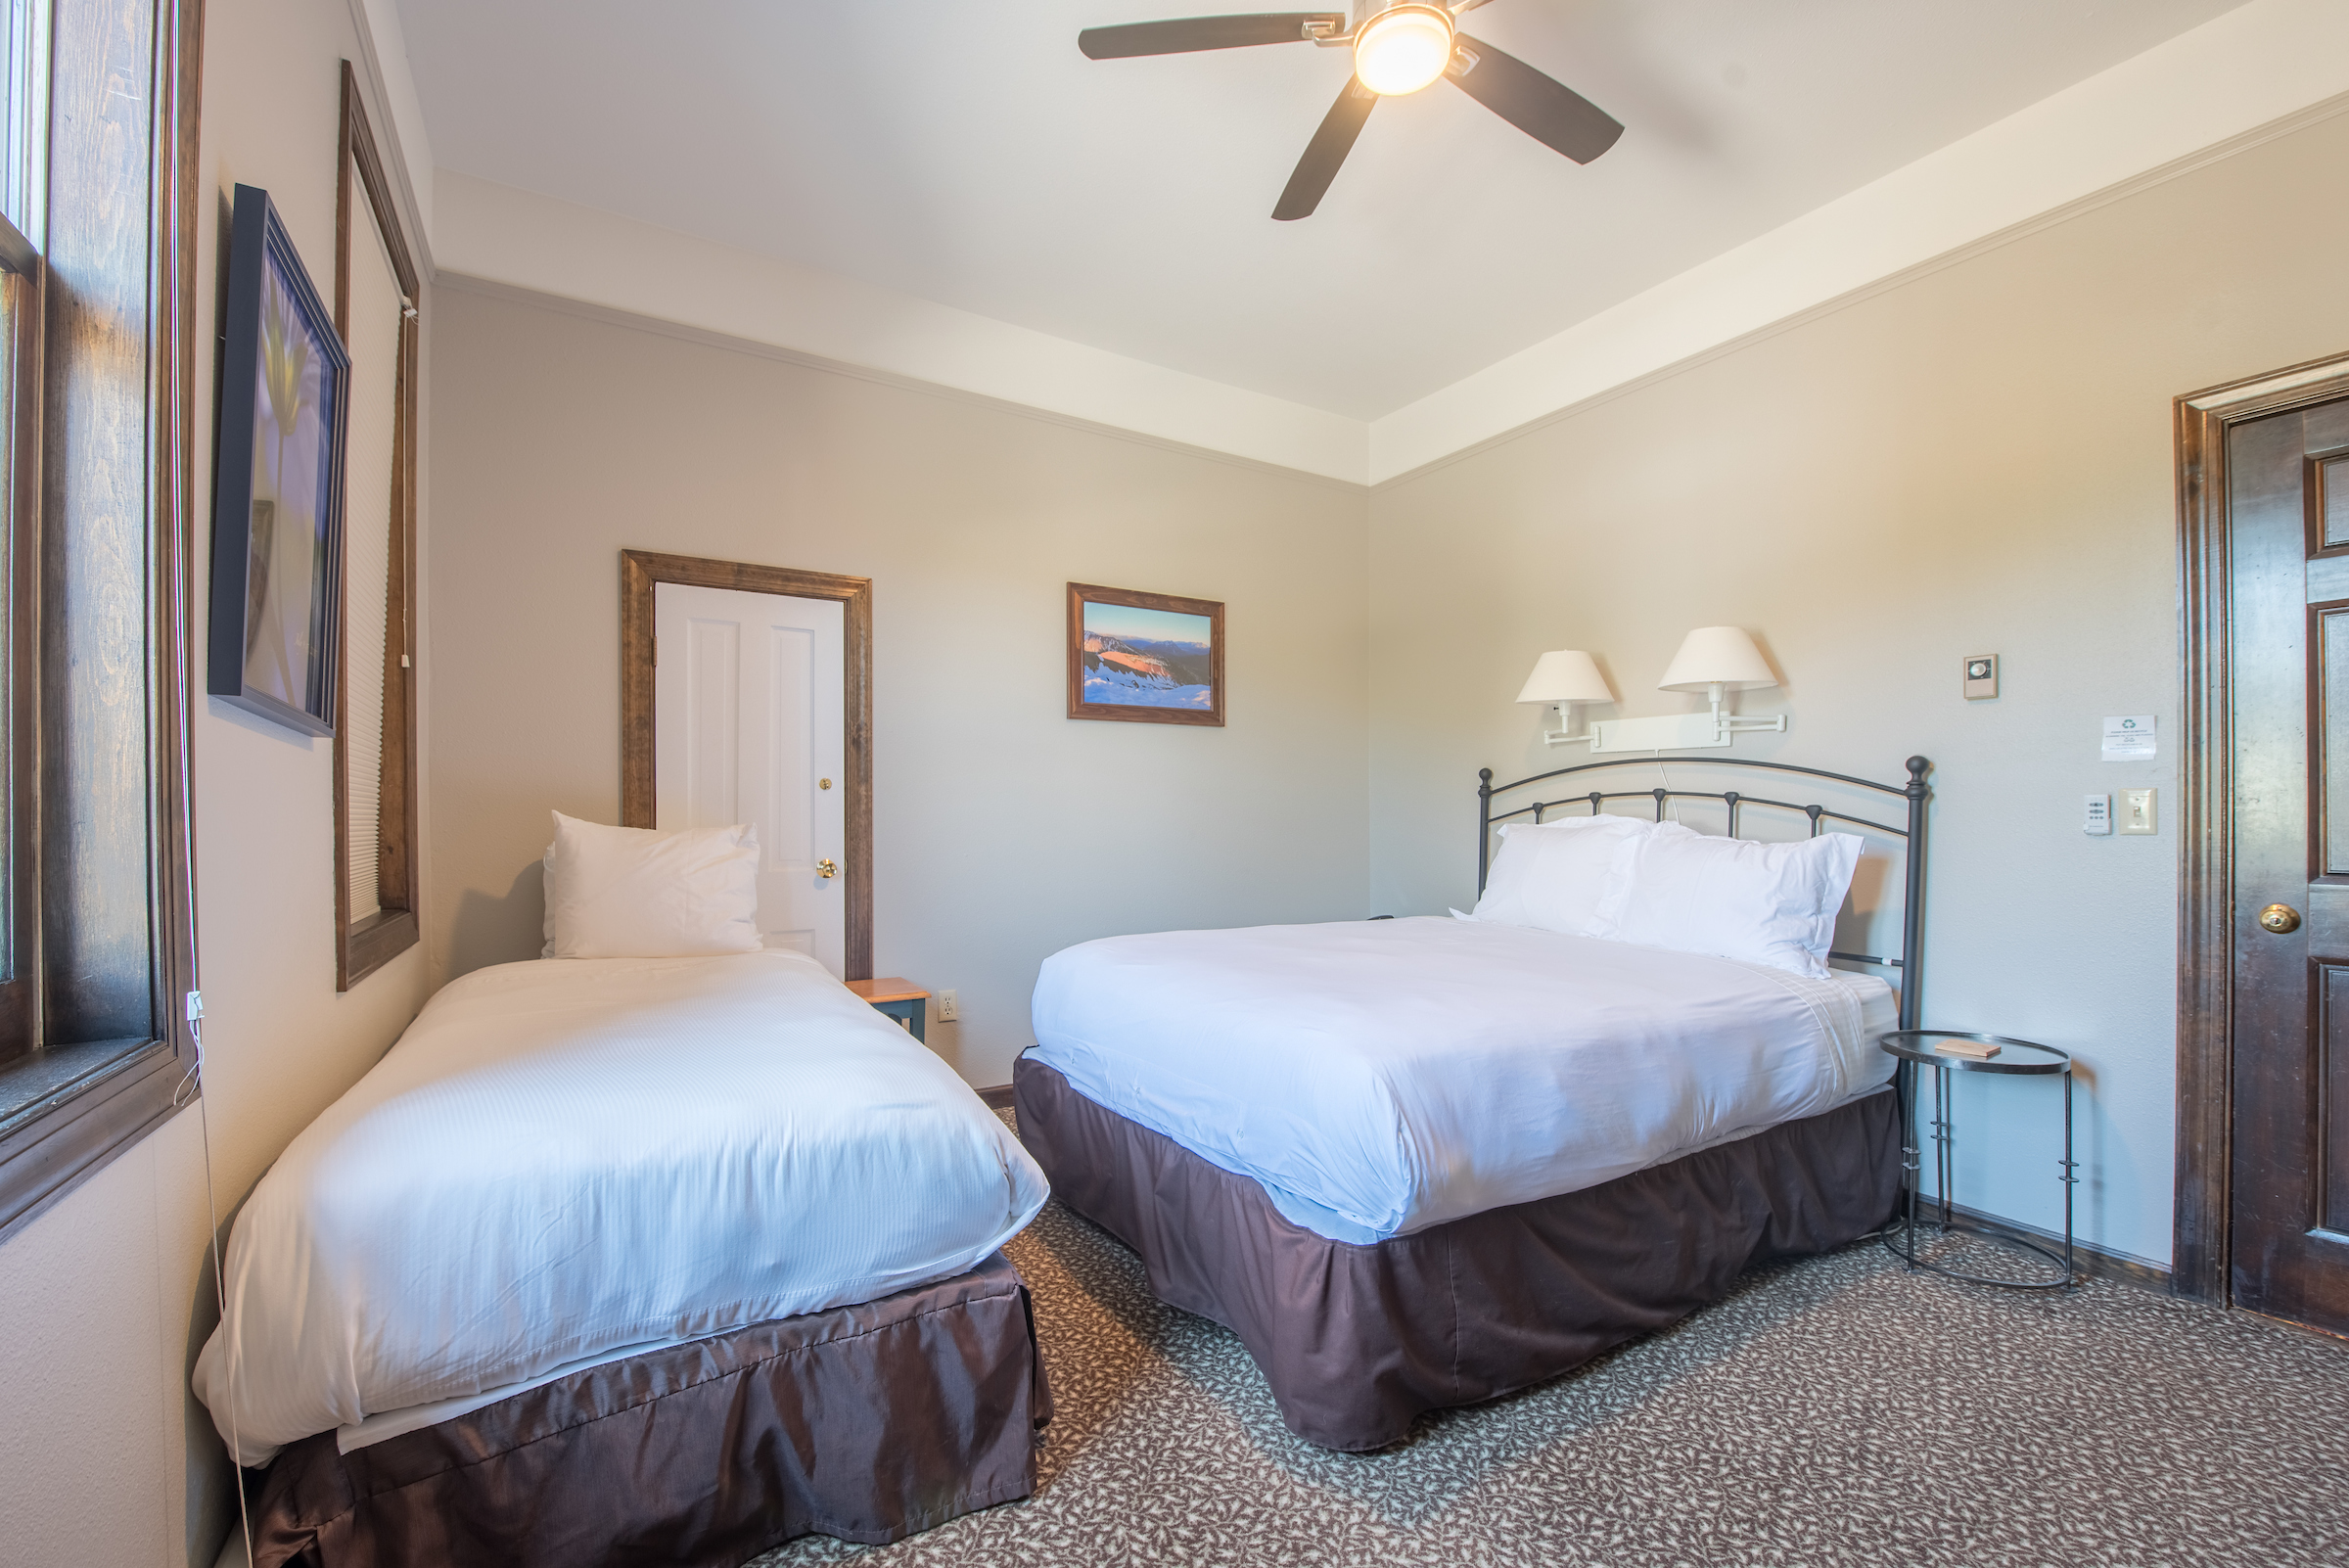 Charming Second Floor Rooms - Elk Mountain Lodge Crested Butte